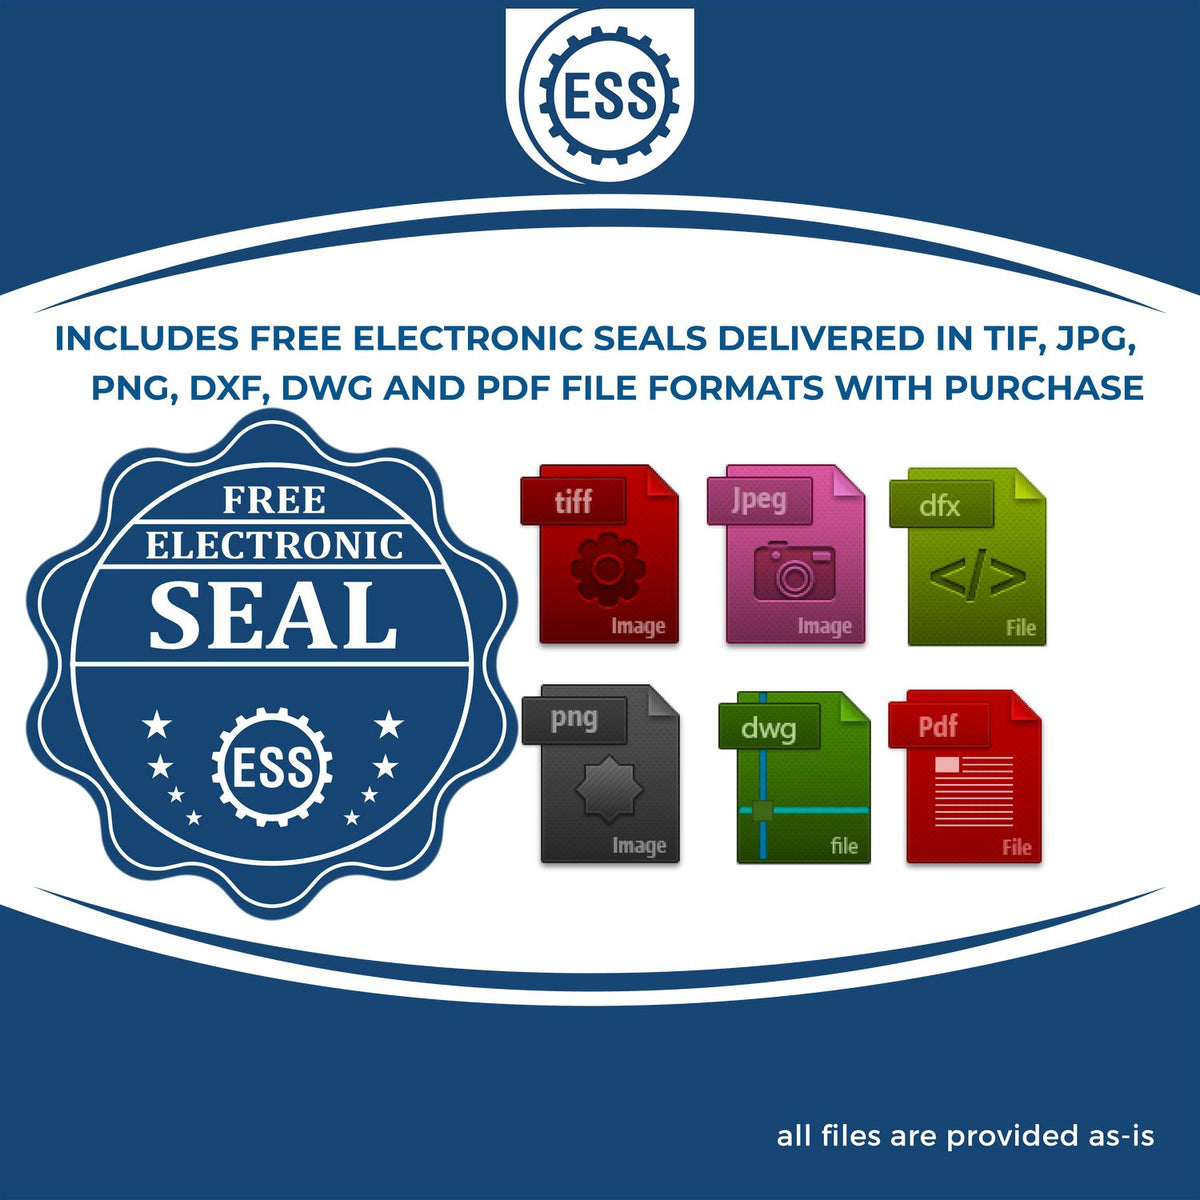 An infographic for the free electronic seal for the Self-Inking Georgia Geologist Stamp illustrating the different file type icons such as DXF, DWG, TIF, JPG and PNG.